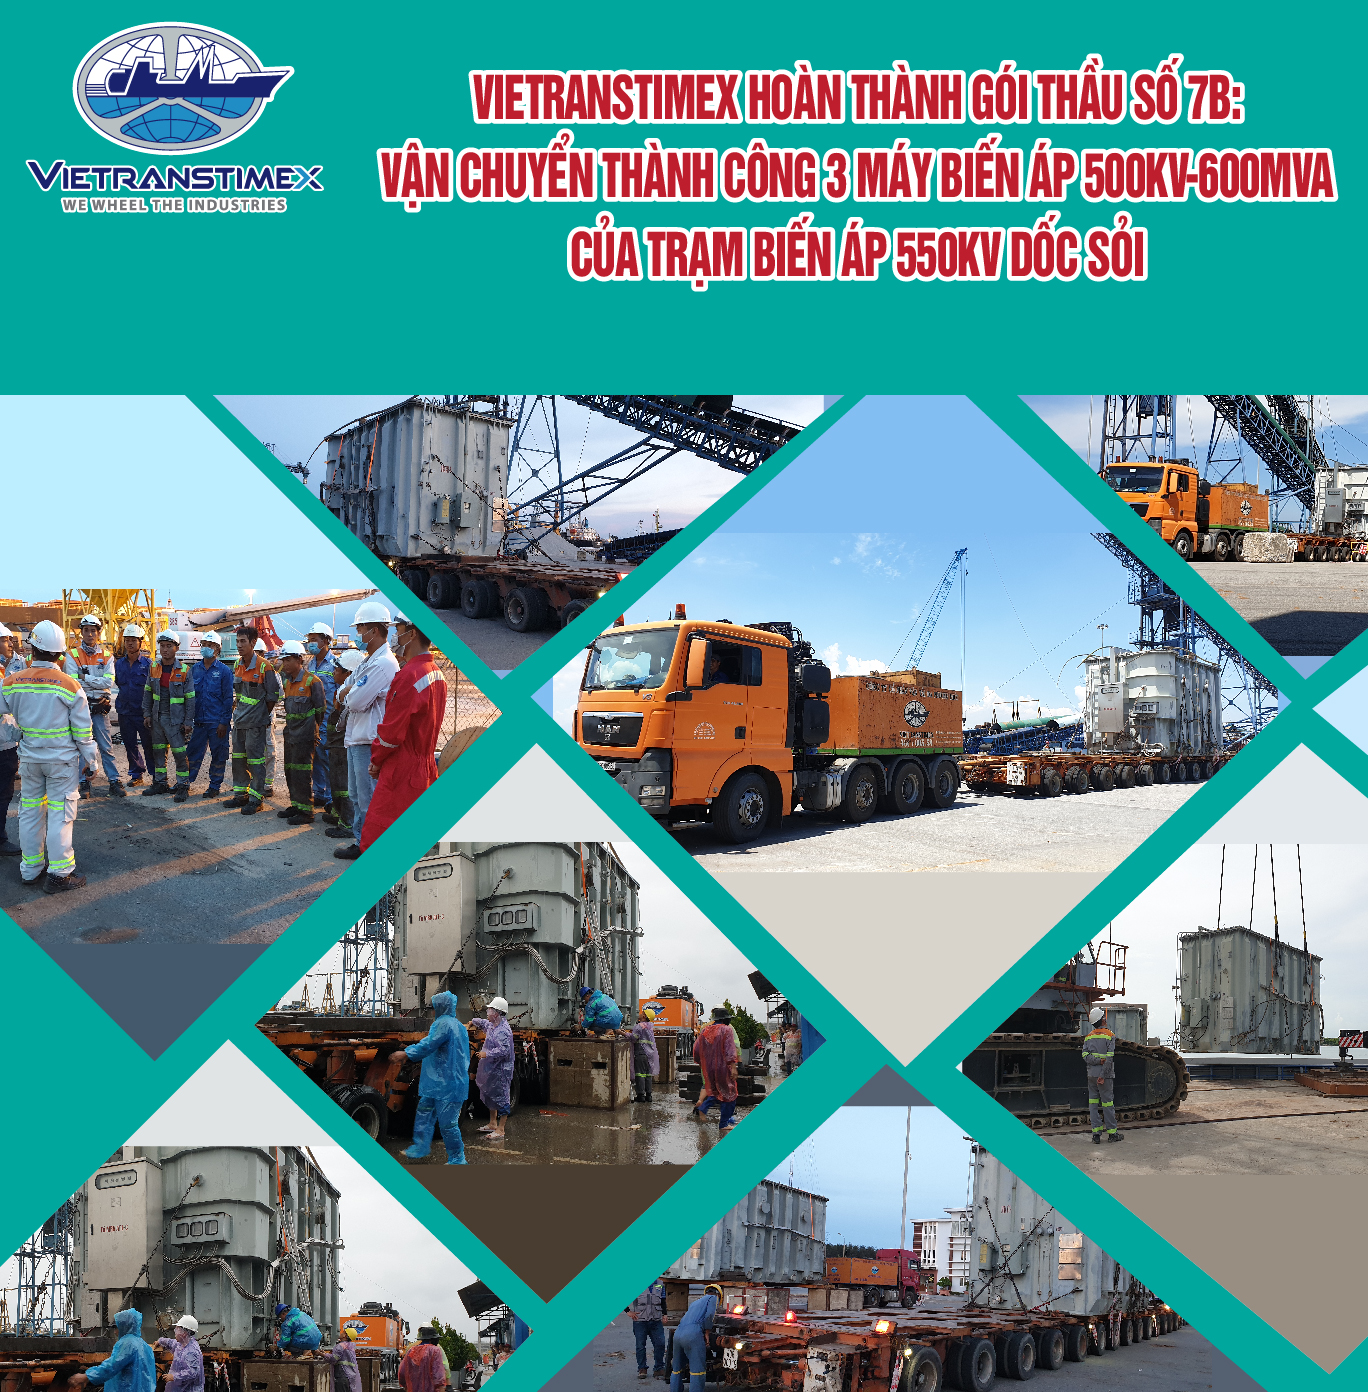 Vietranstimex Fully Completed The Package 7b: Transporting Three 500kV-600MVA Transformers Of Doc Soi 500kV Substation